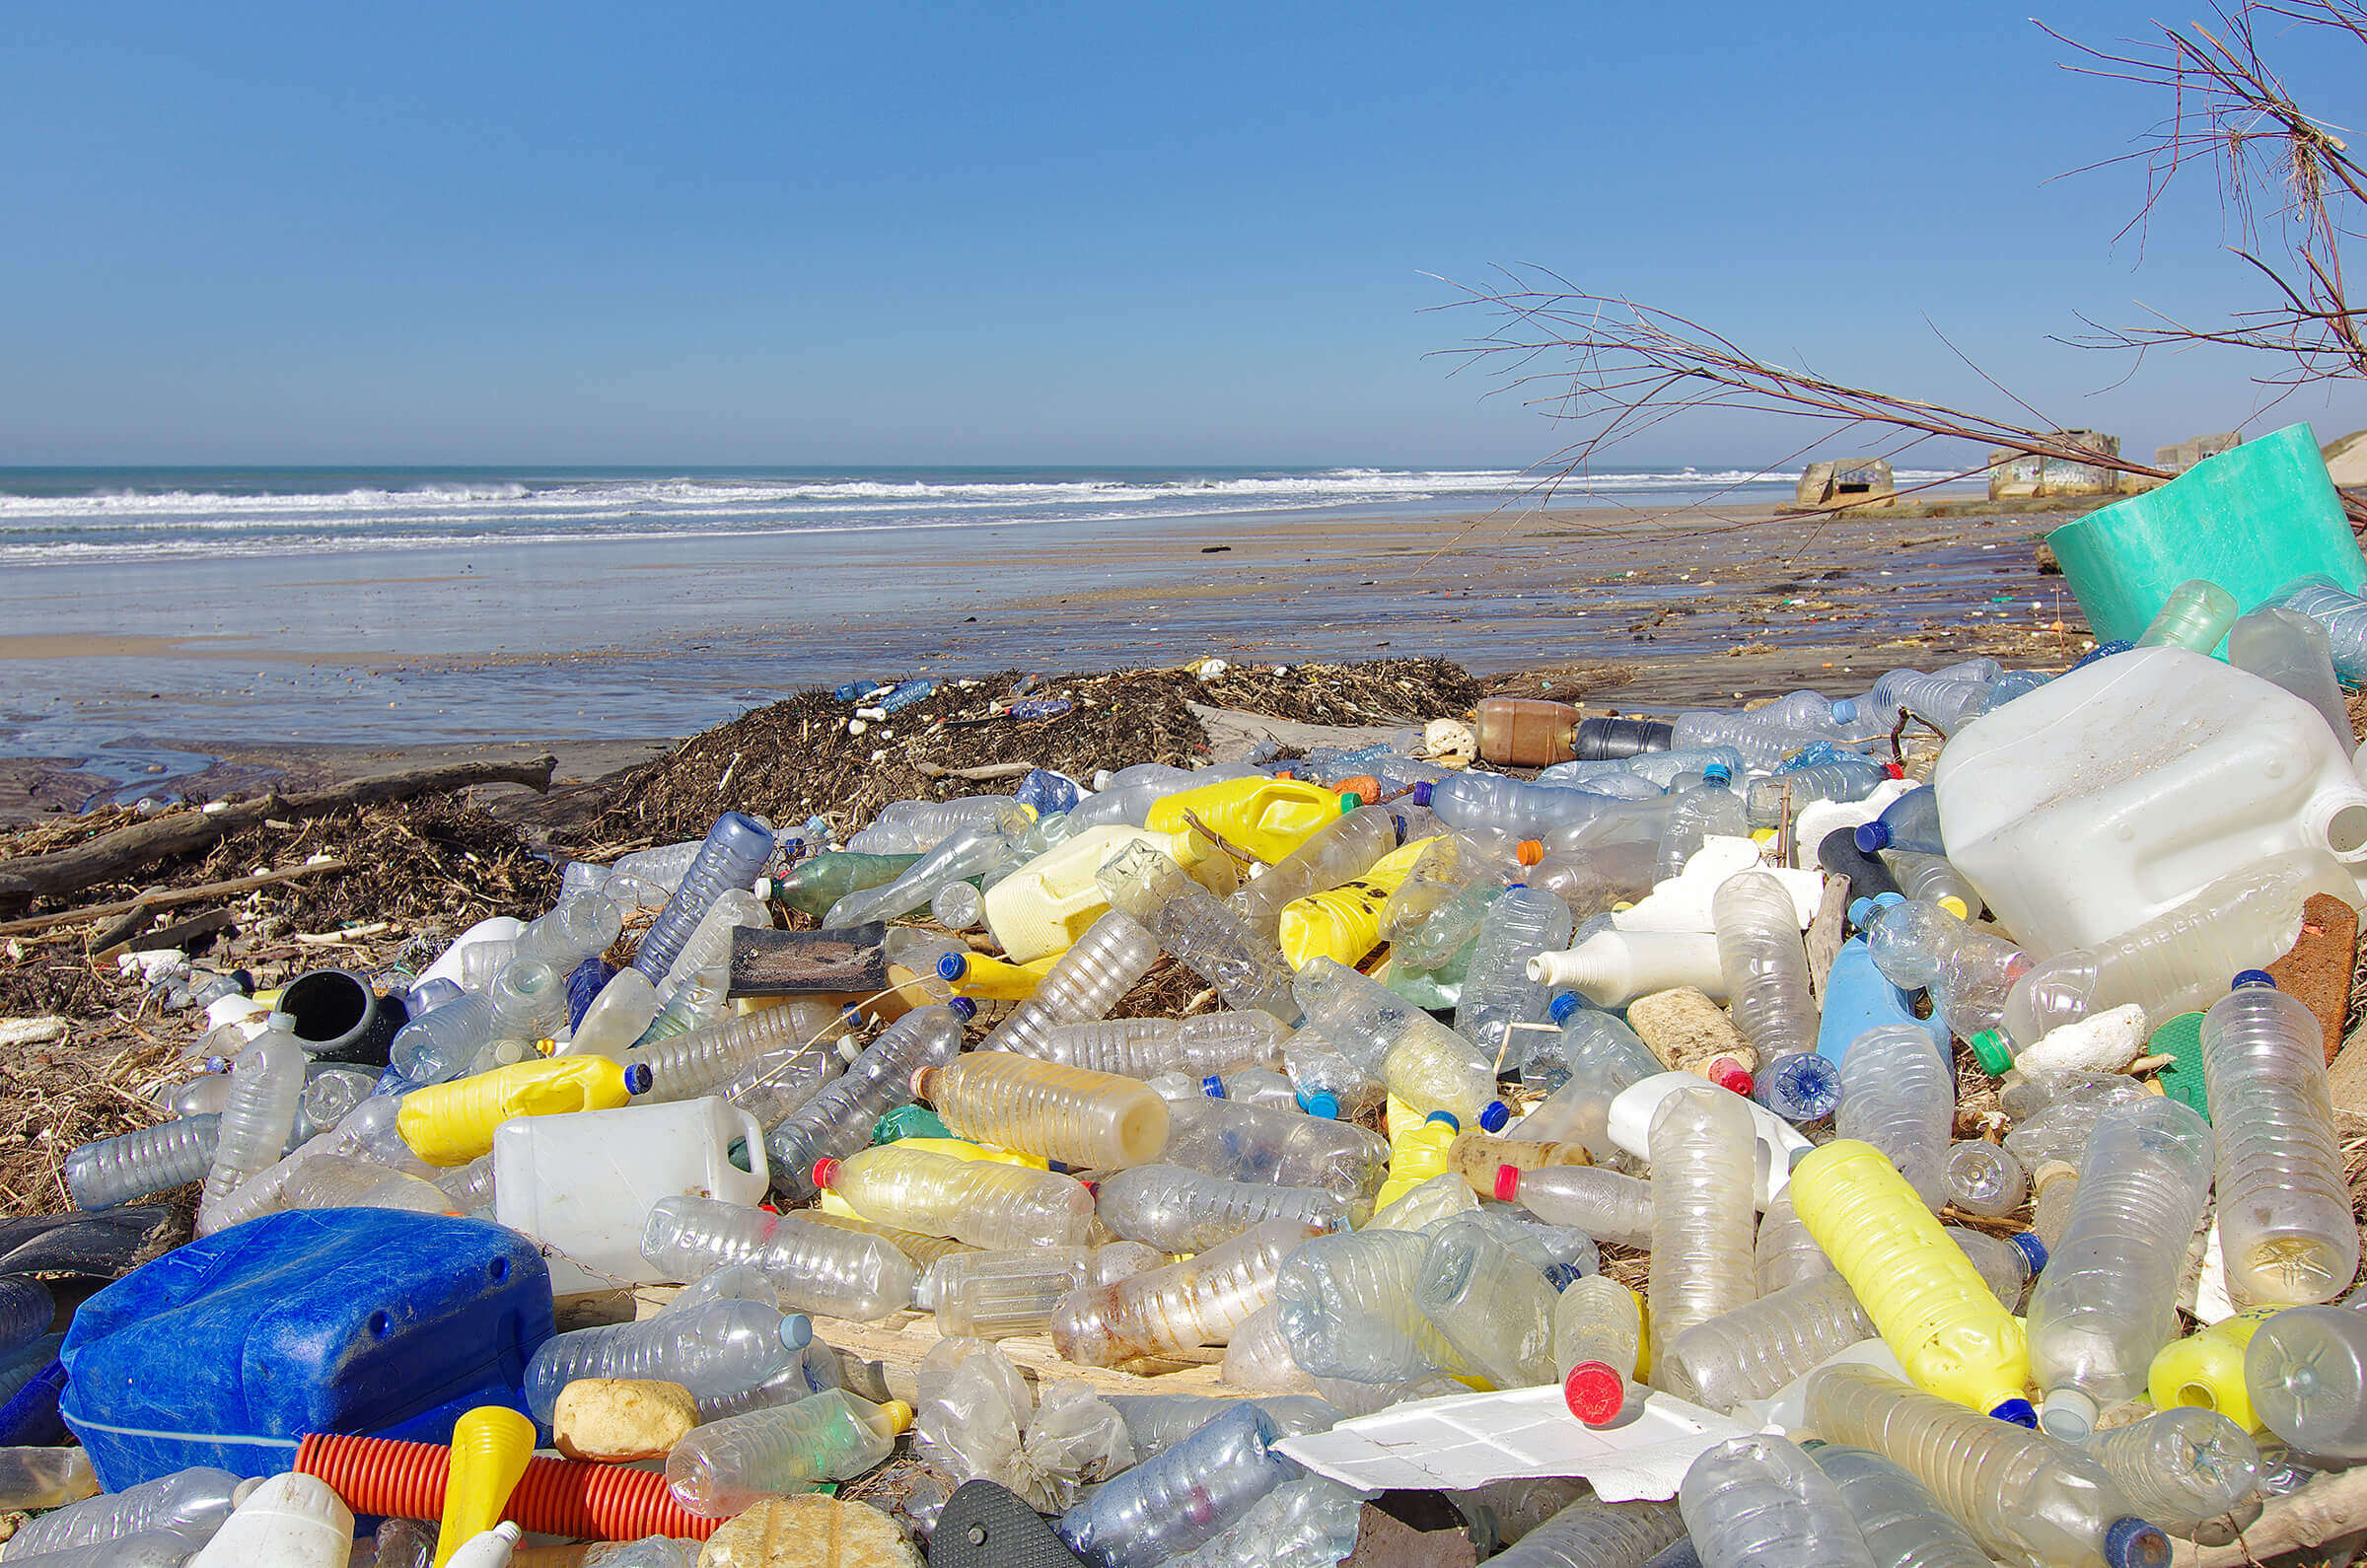 Millions of tons of the world’s plastic waste could be turned into